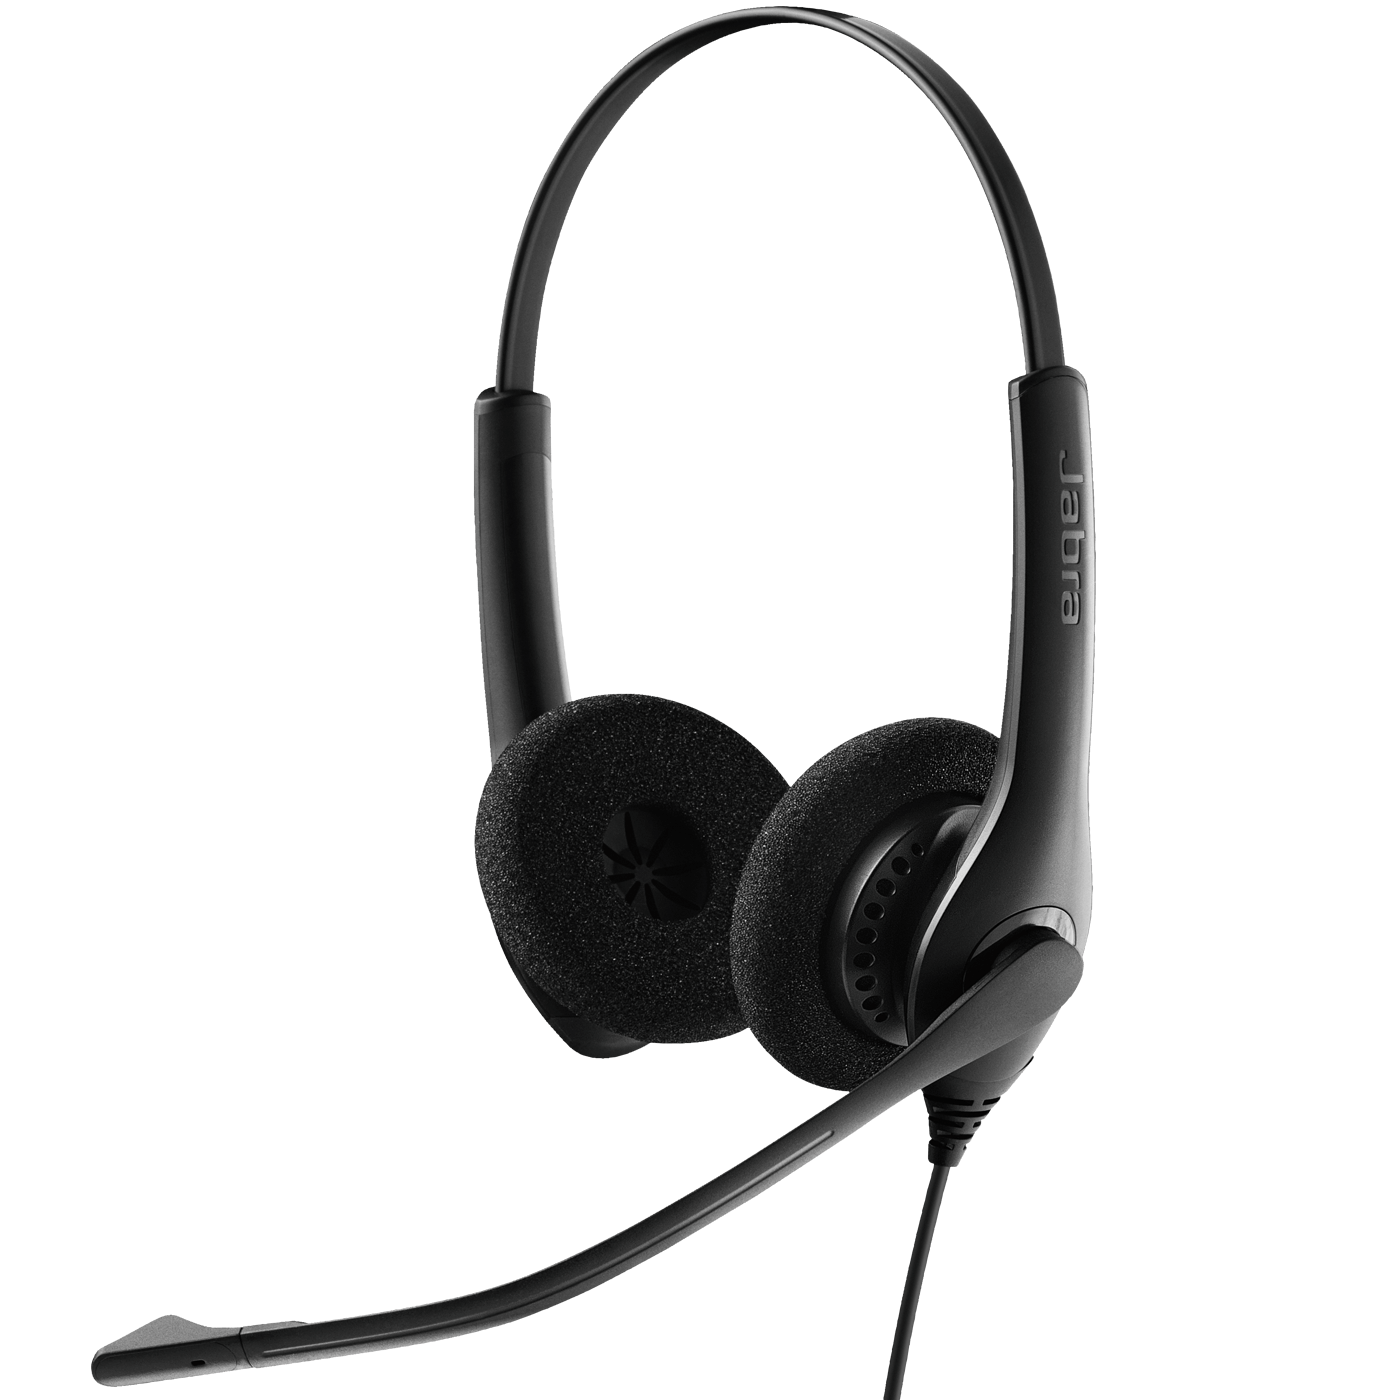 Noise Cancelling Microphone Headset Call Centre Office Telephone Headphones UK 